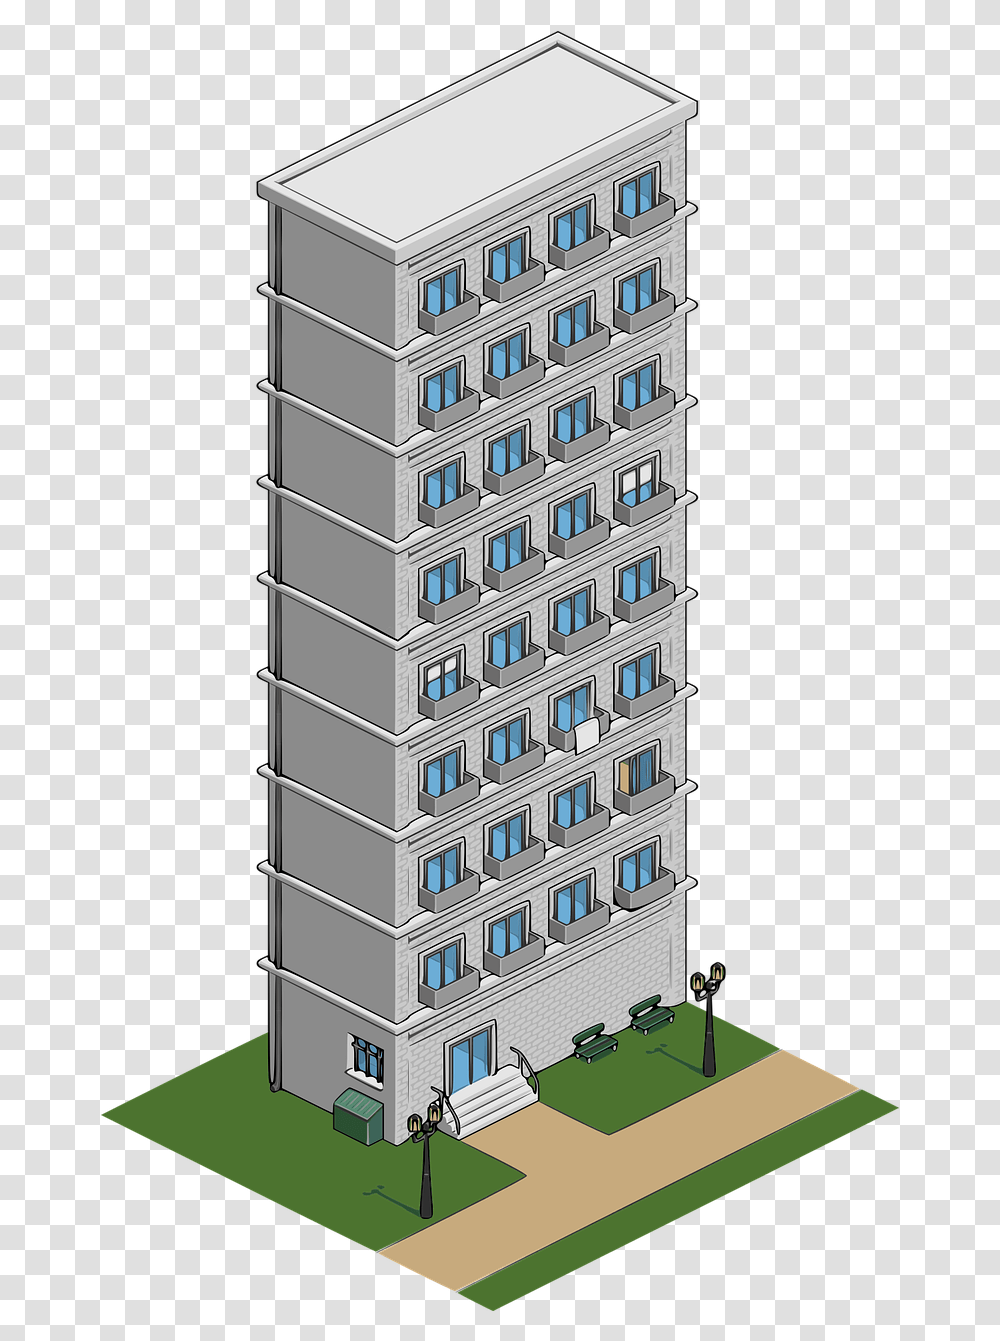 House Lantern Street Free Vector Graphic On Pixabay Gedung, High Rise, City, Urban, Building Transparent Png